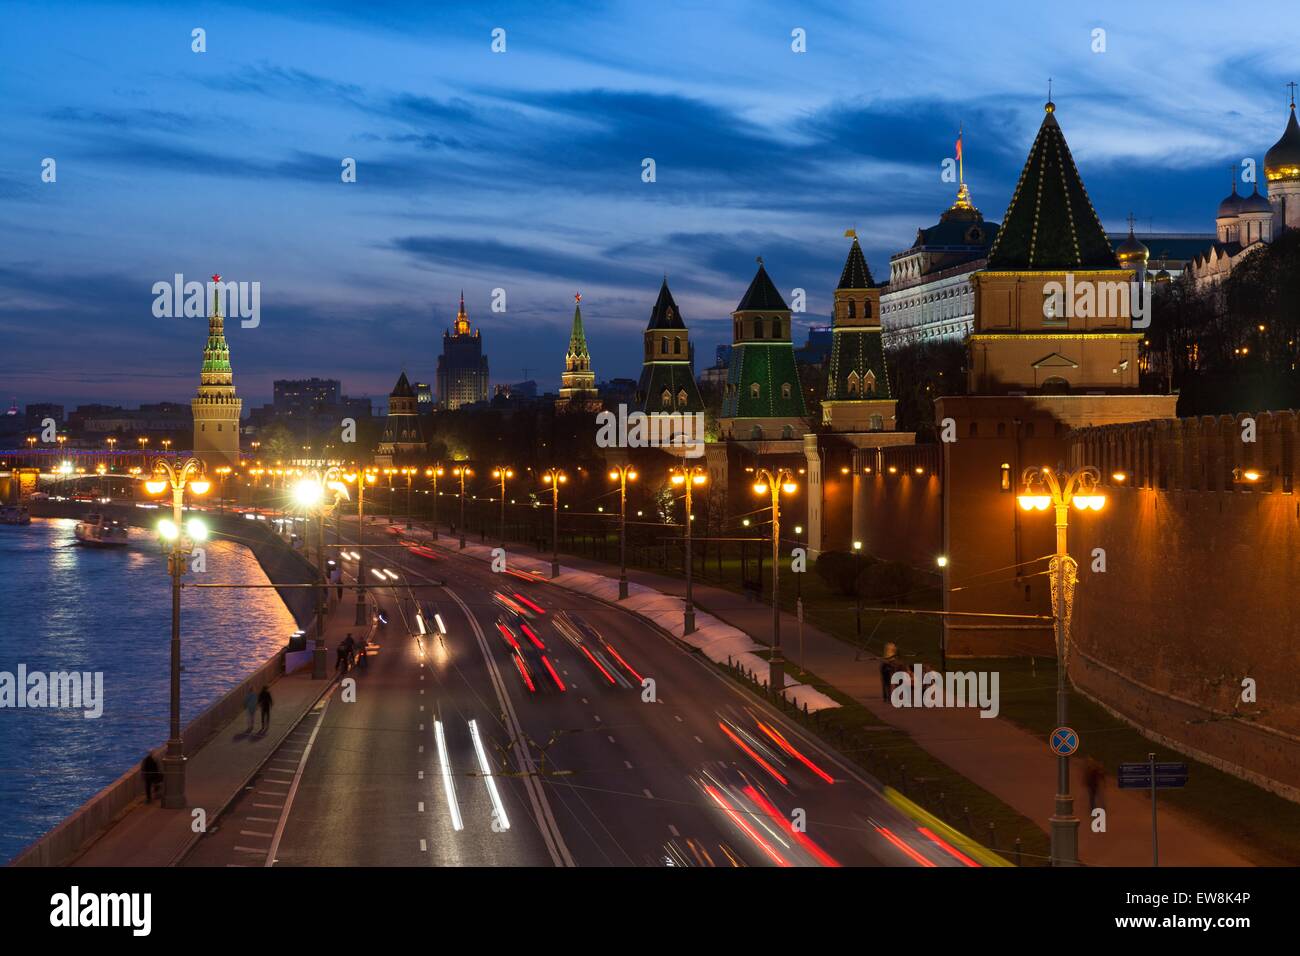 The view of the Moscow Kremlin, Ministry of Foreign Affairs and Kremlevskaya Embankment at dusk, Moscow, Russia at May 07 2014. Stock Photo